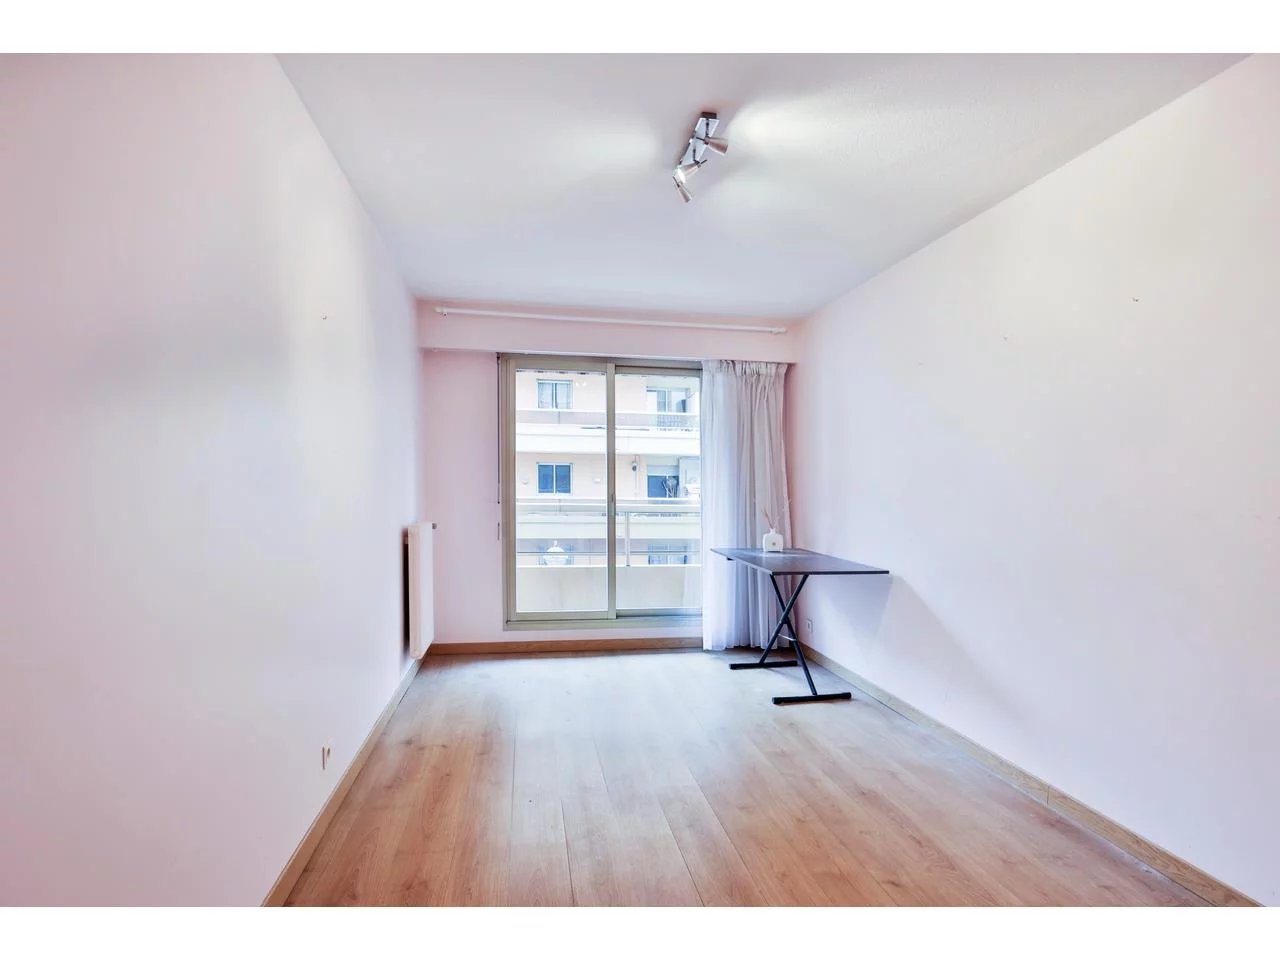 Appartement  3 Rooms 81.11m2  for sale   410 000 €